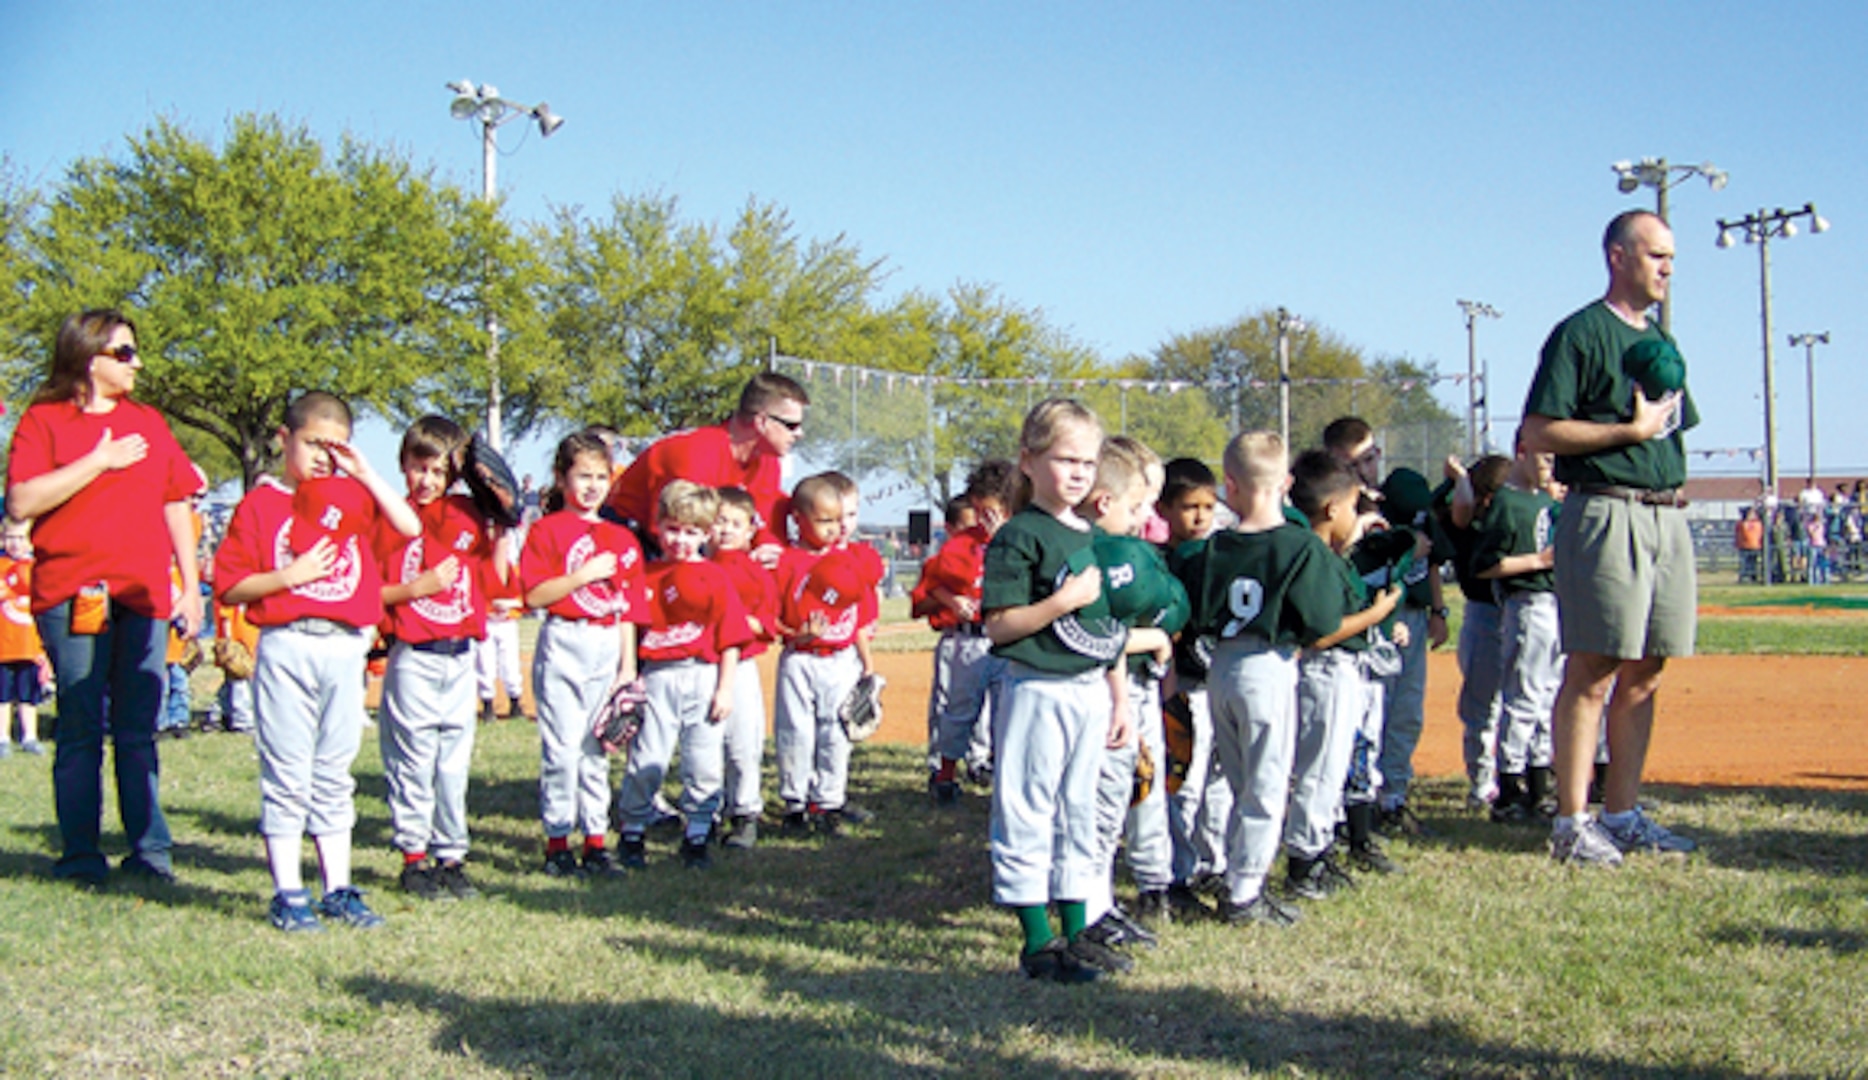 The Randolph Youth Center opened its spring t-ball, softball and baseball season with the national anthem at Ebbets Field Monday. More than 150 Randolph youth participated in the ceremony. (Photo by Maggie Armstrong)